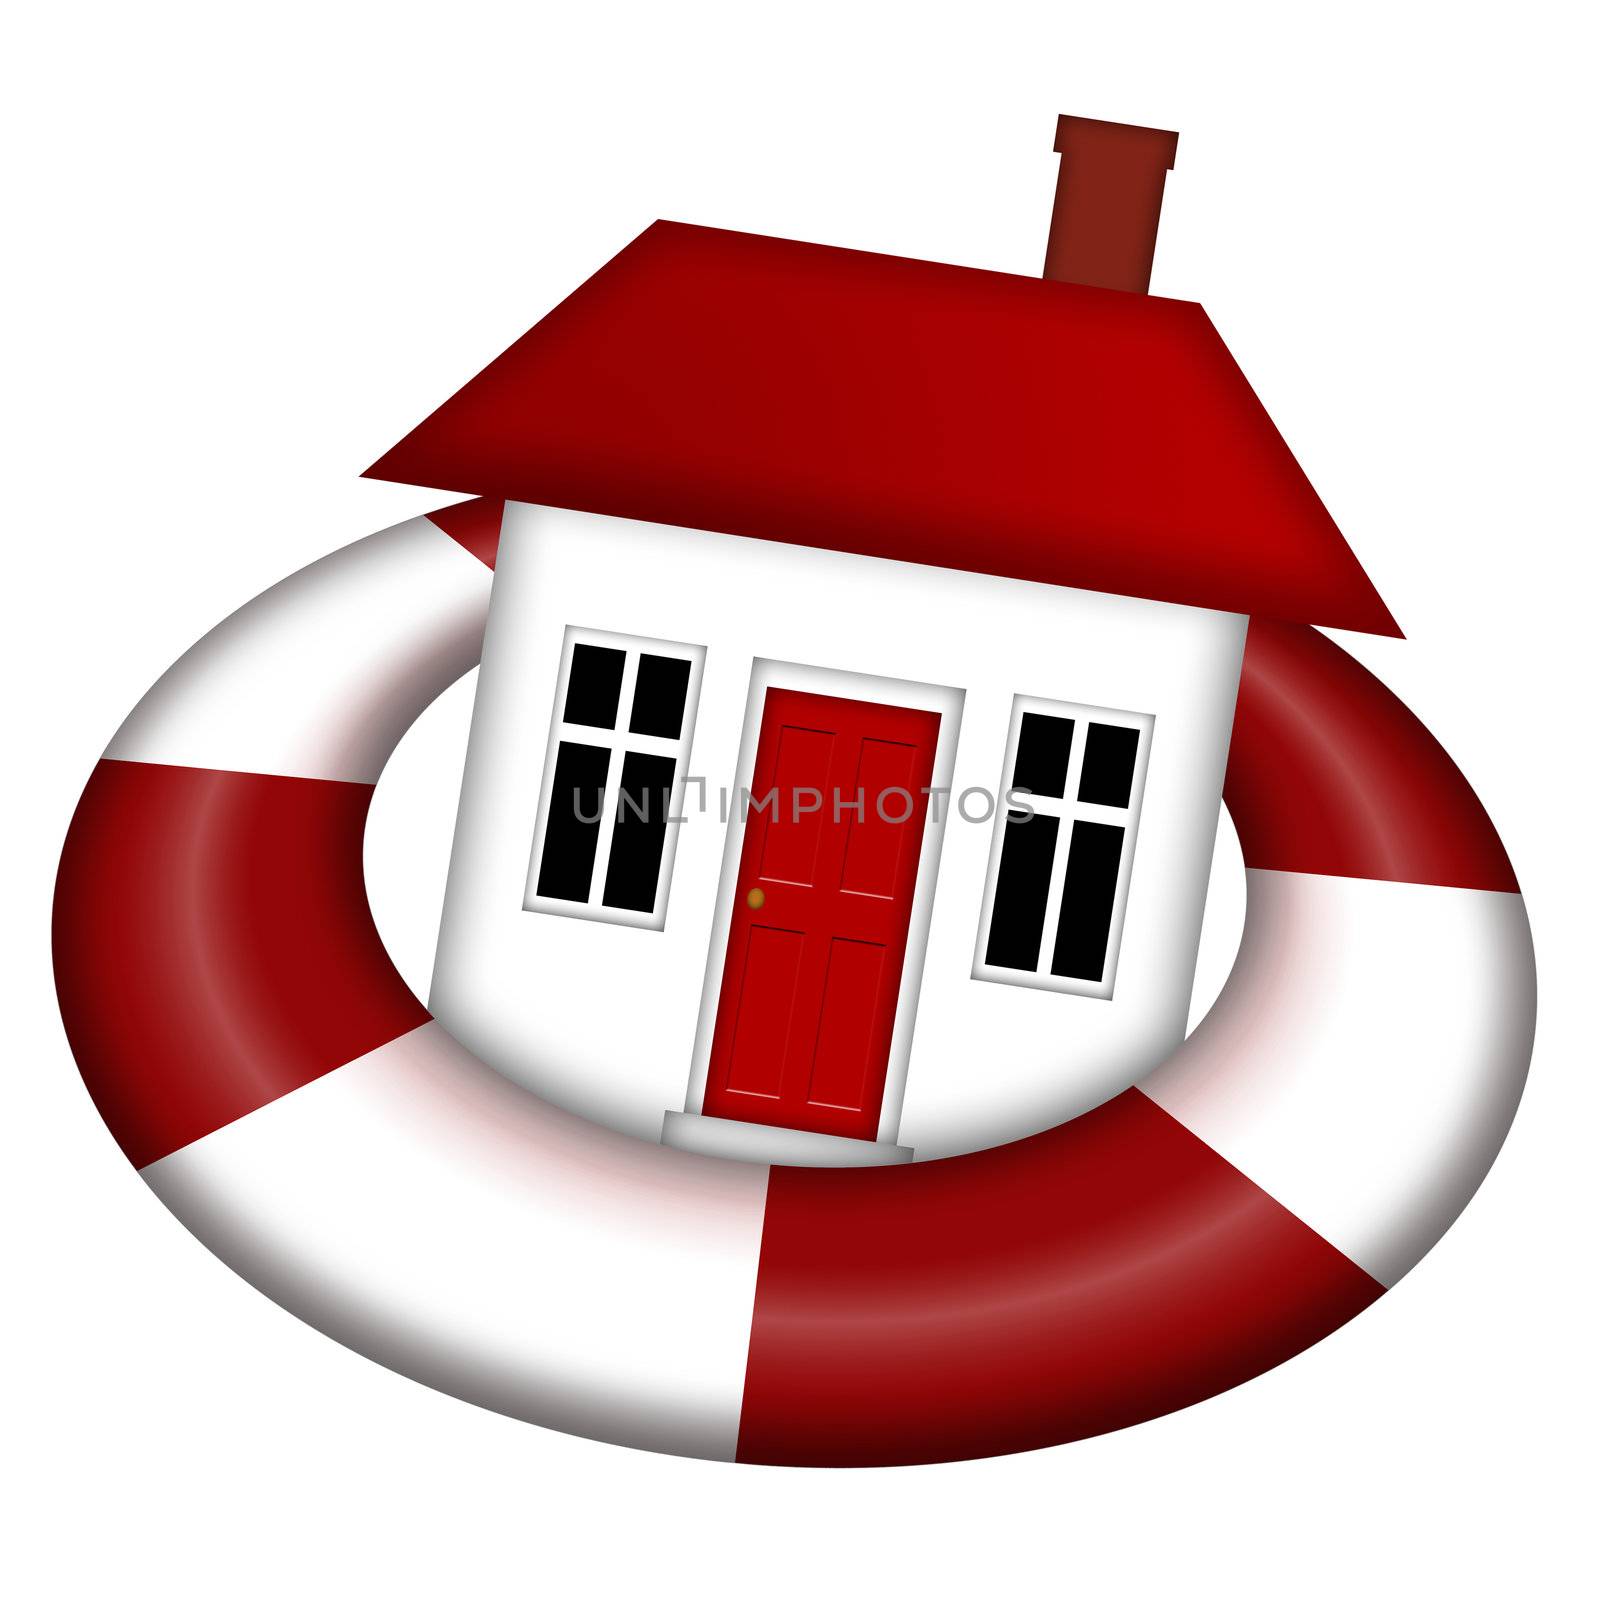 House Afloat on Lifesaver by Davidgn